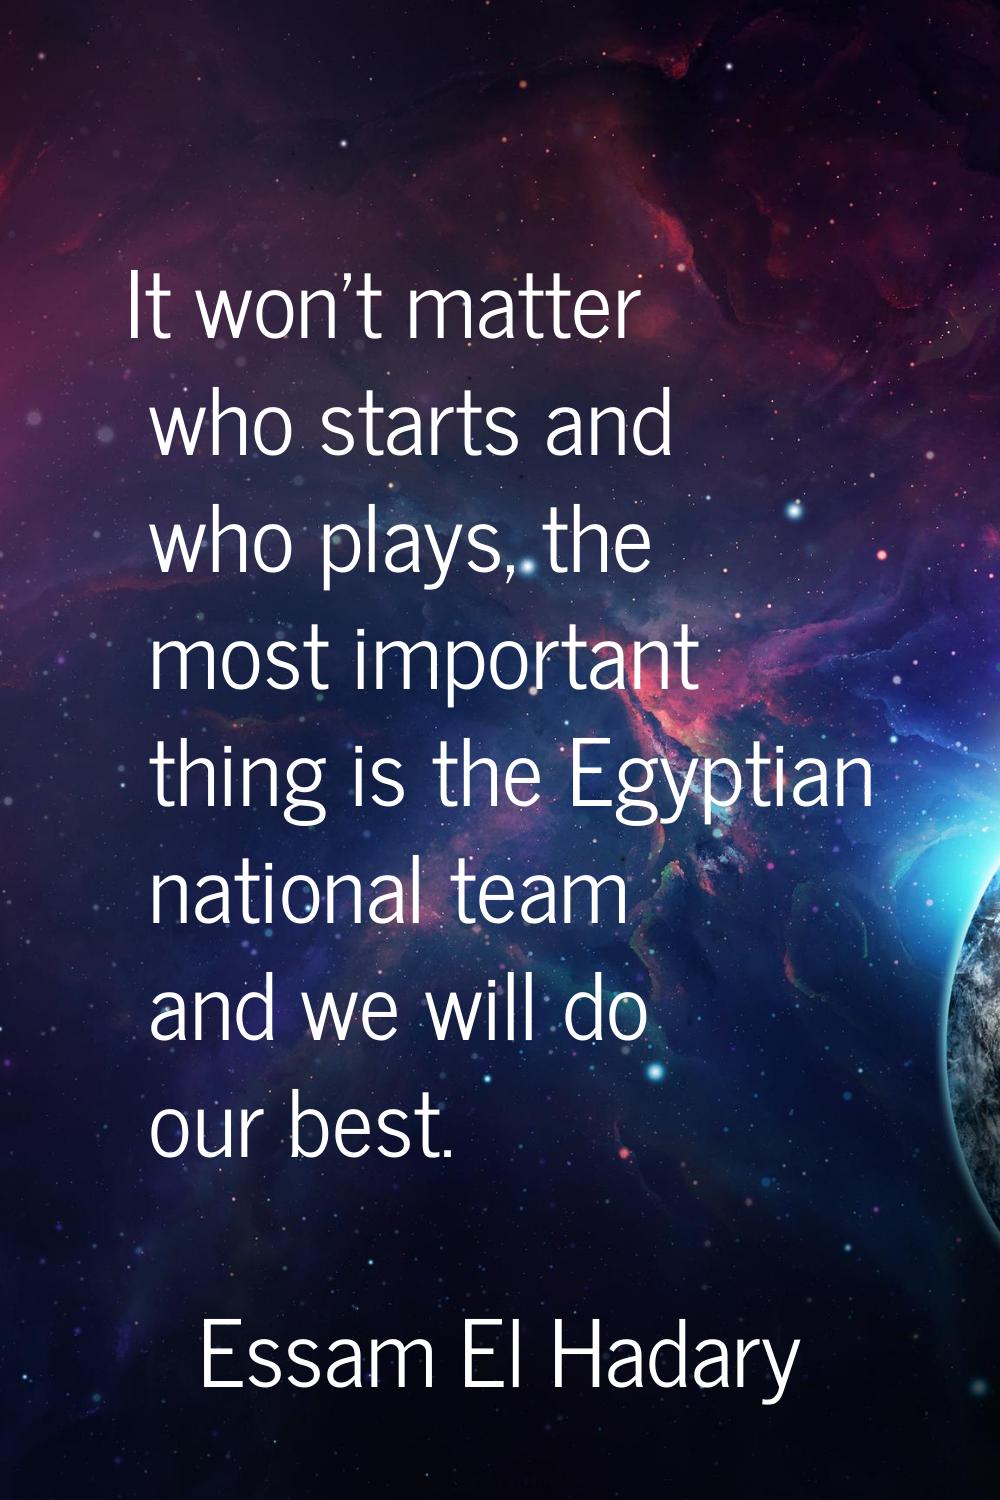 It won't matter who starts and who plays, the most important thing is the Egyptian national team an